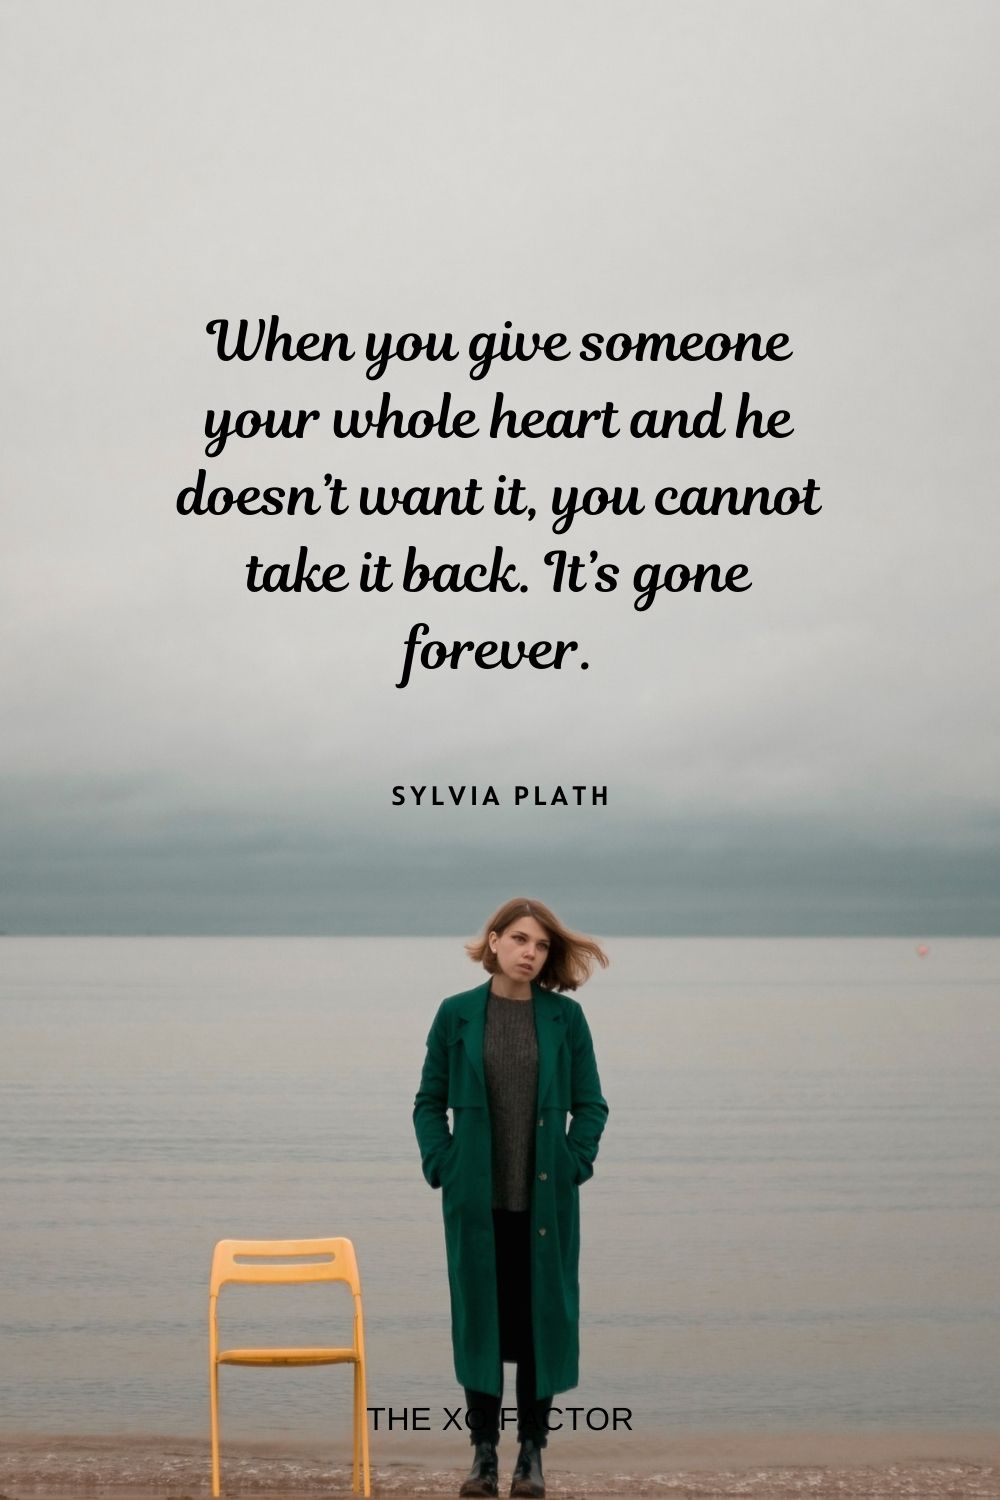 When you give someone your whole heart and he doesn’t want it, you cannot take it back. It’s gone forever. Sylvia Plath